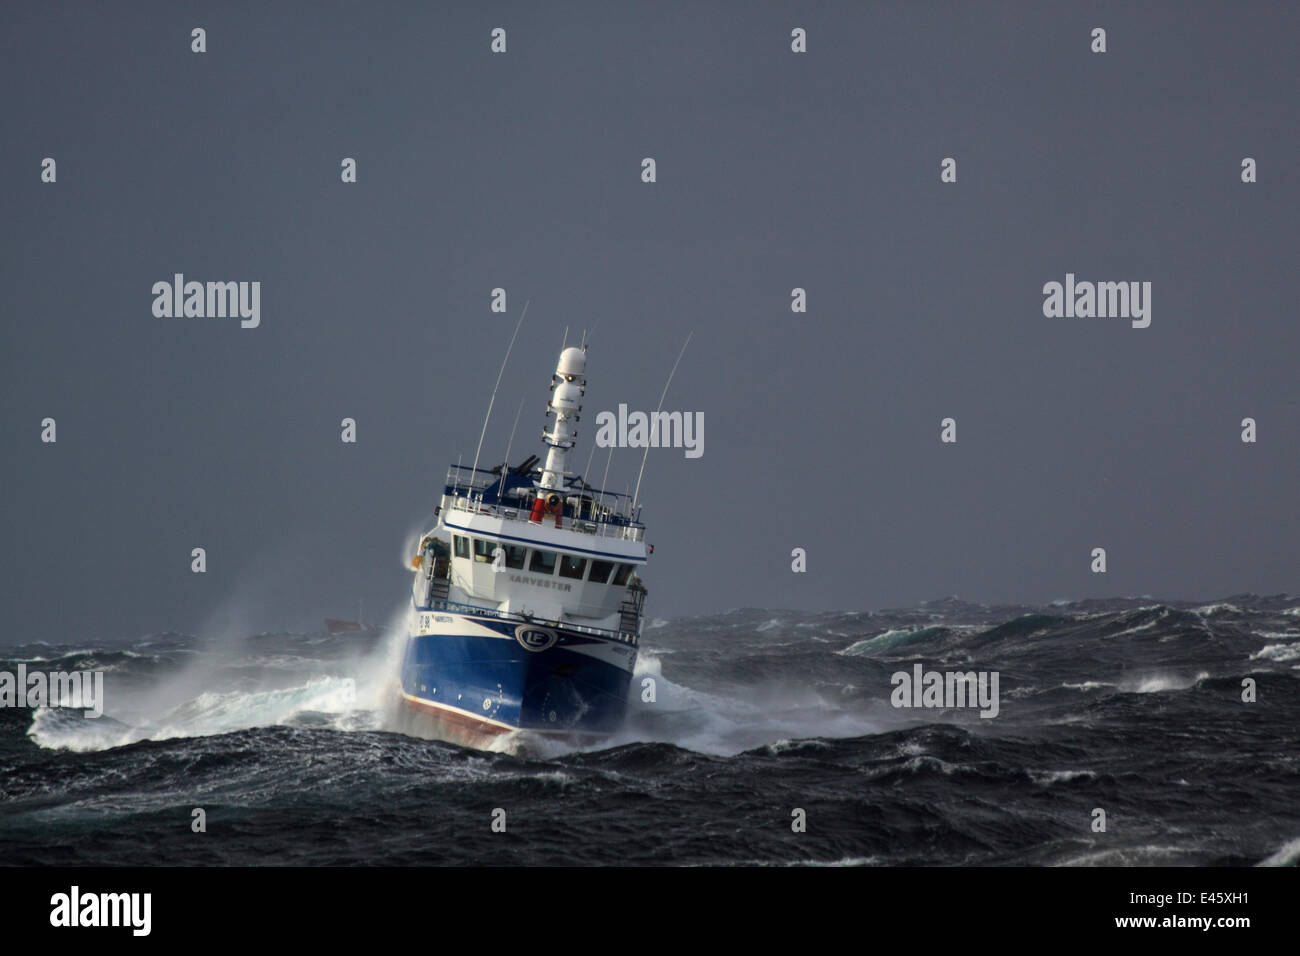 Fishing vessel "Harvester" heading to North Sea fishing grounds in stormy weather. Europe, November 2010. Property released. Stock Photo